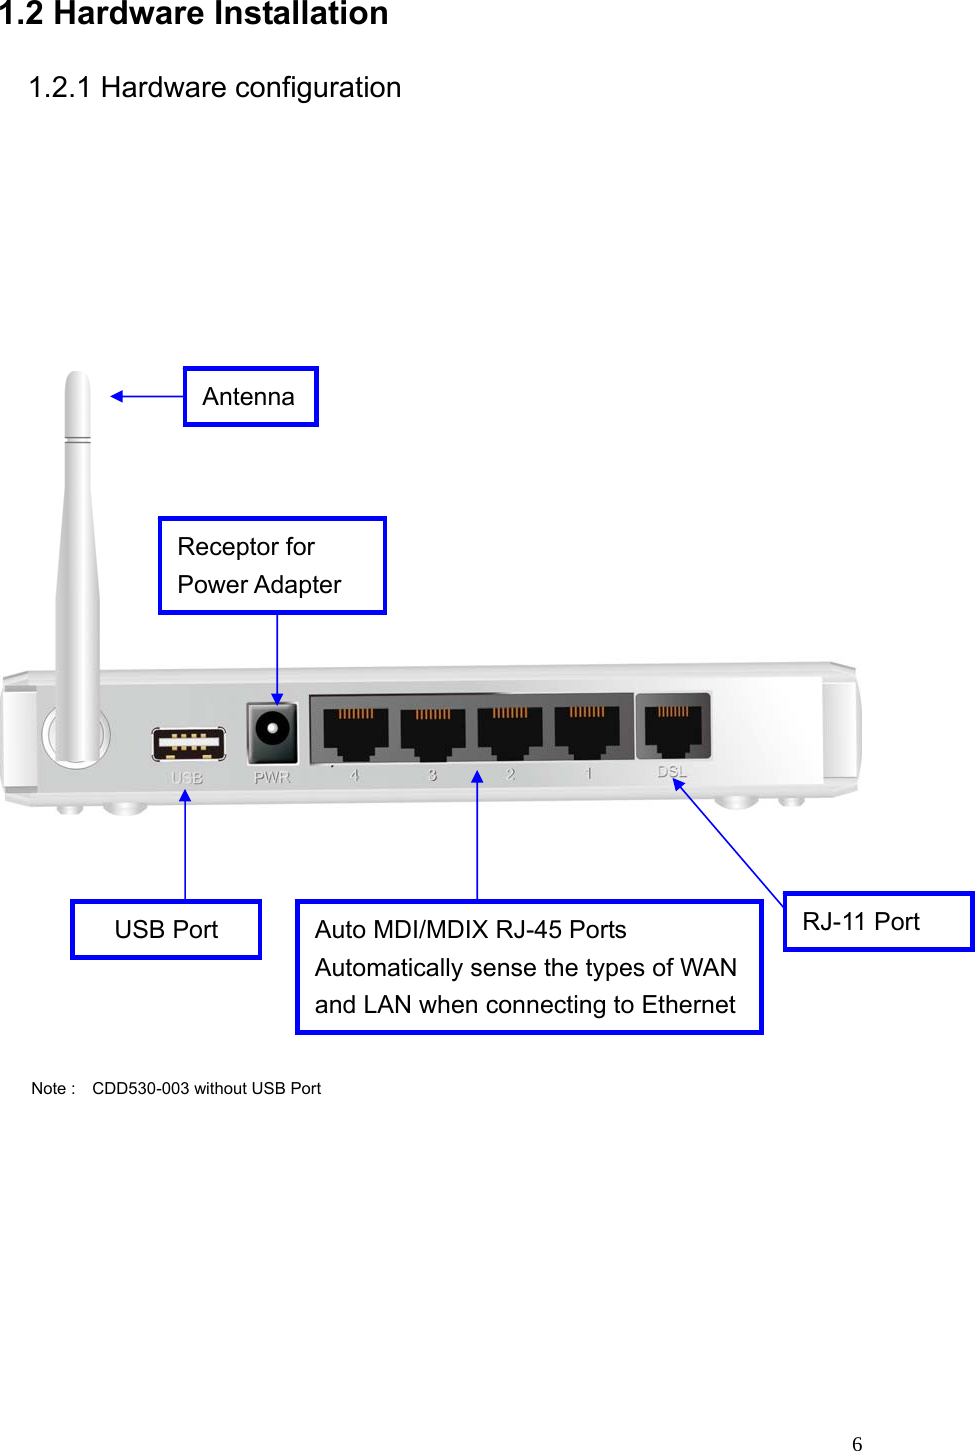  61.2 Hardware Installation 1.2.1 Hardware configuration          Antenna Receptor for Power Adapter USB Port  RJ-11 Port Auto MDI/MDIX RJ-45 Ports Automatically sense the types of WAN and LAN when connecting to Ethernet Note :  CDD530-003 without USB Port 